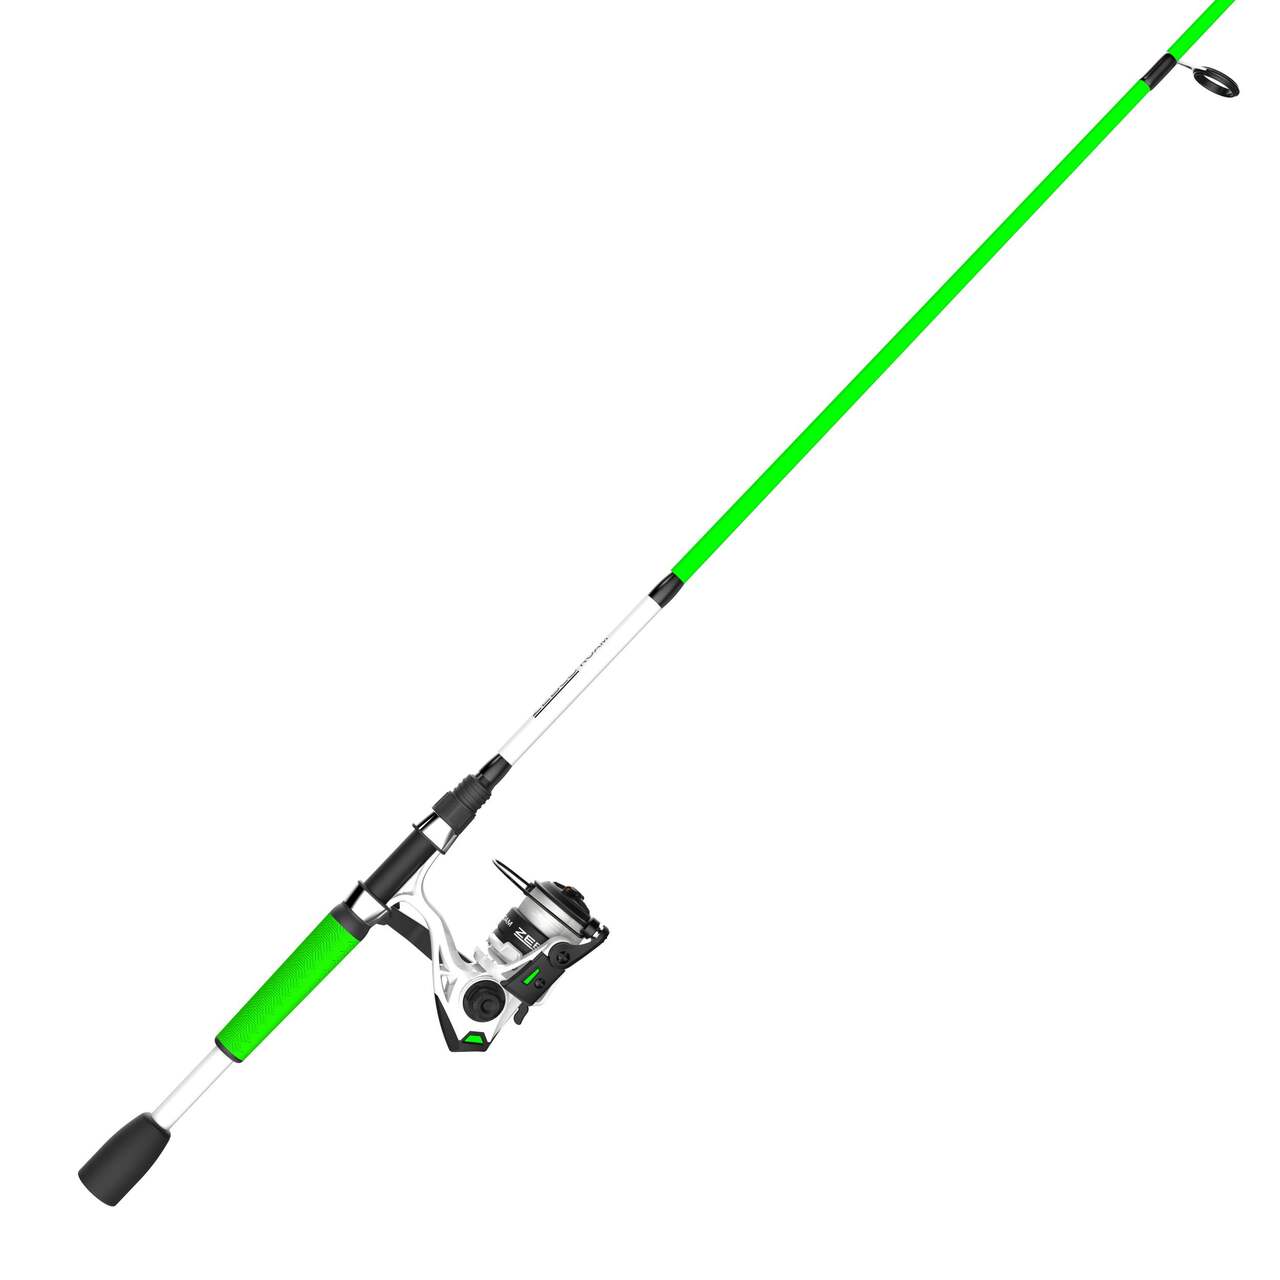 Zebco Roam 30 Two-Piece Spinning Combo Reel, Green, 6.6-ft